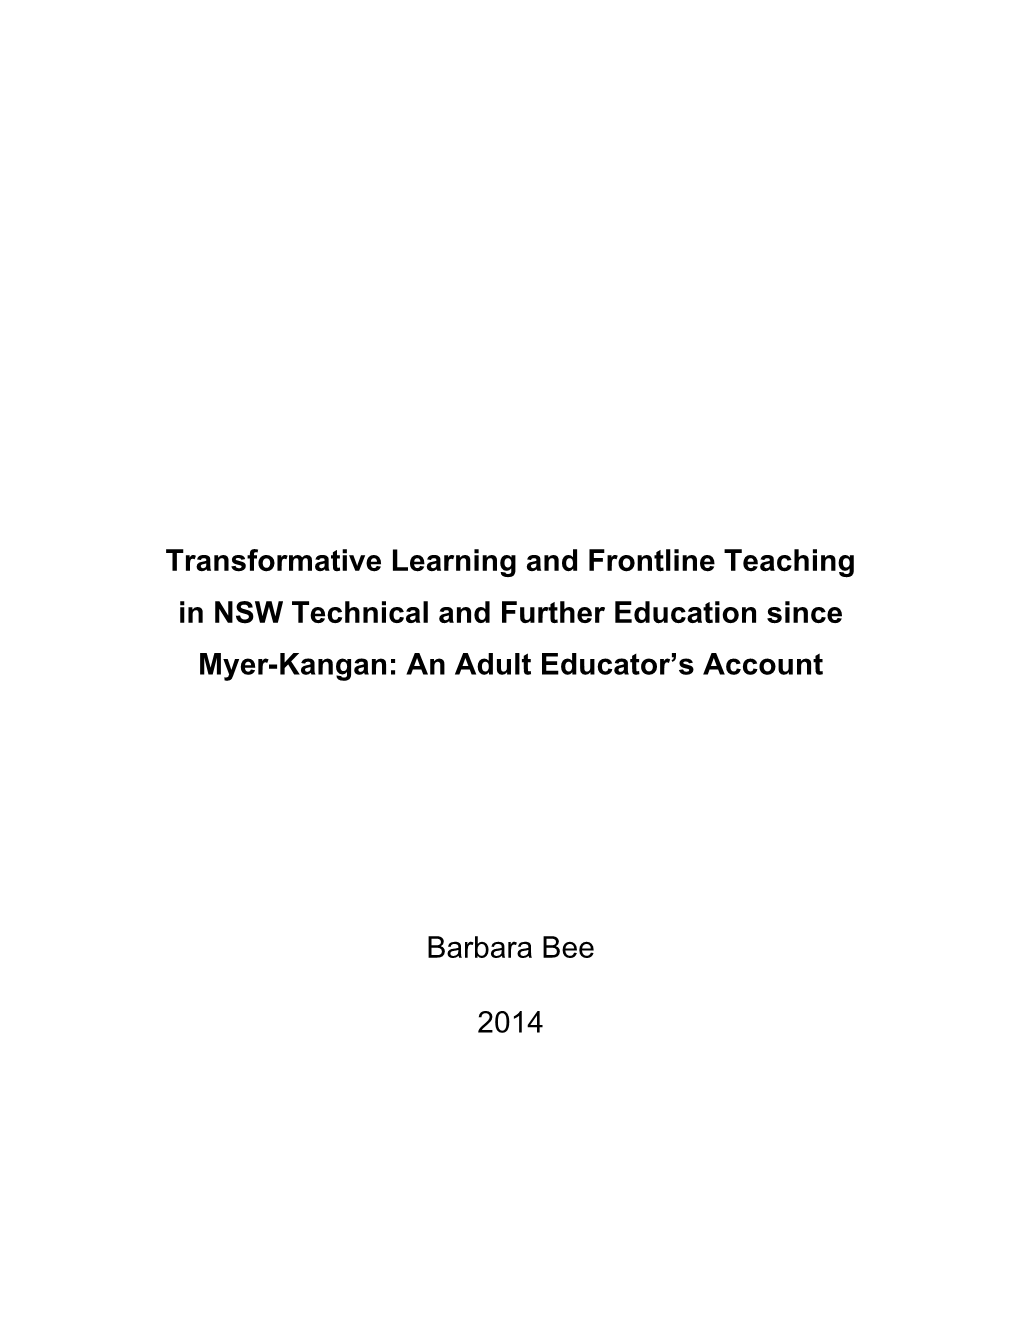 Transformative Learning and Frontline Teaching in NSW Technical and Further Education Since Myer-Kangan: an Adult Educator’S Account